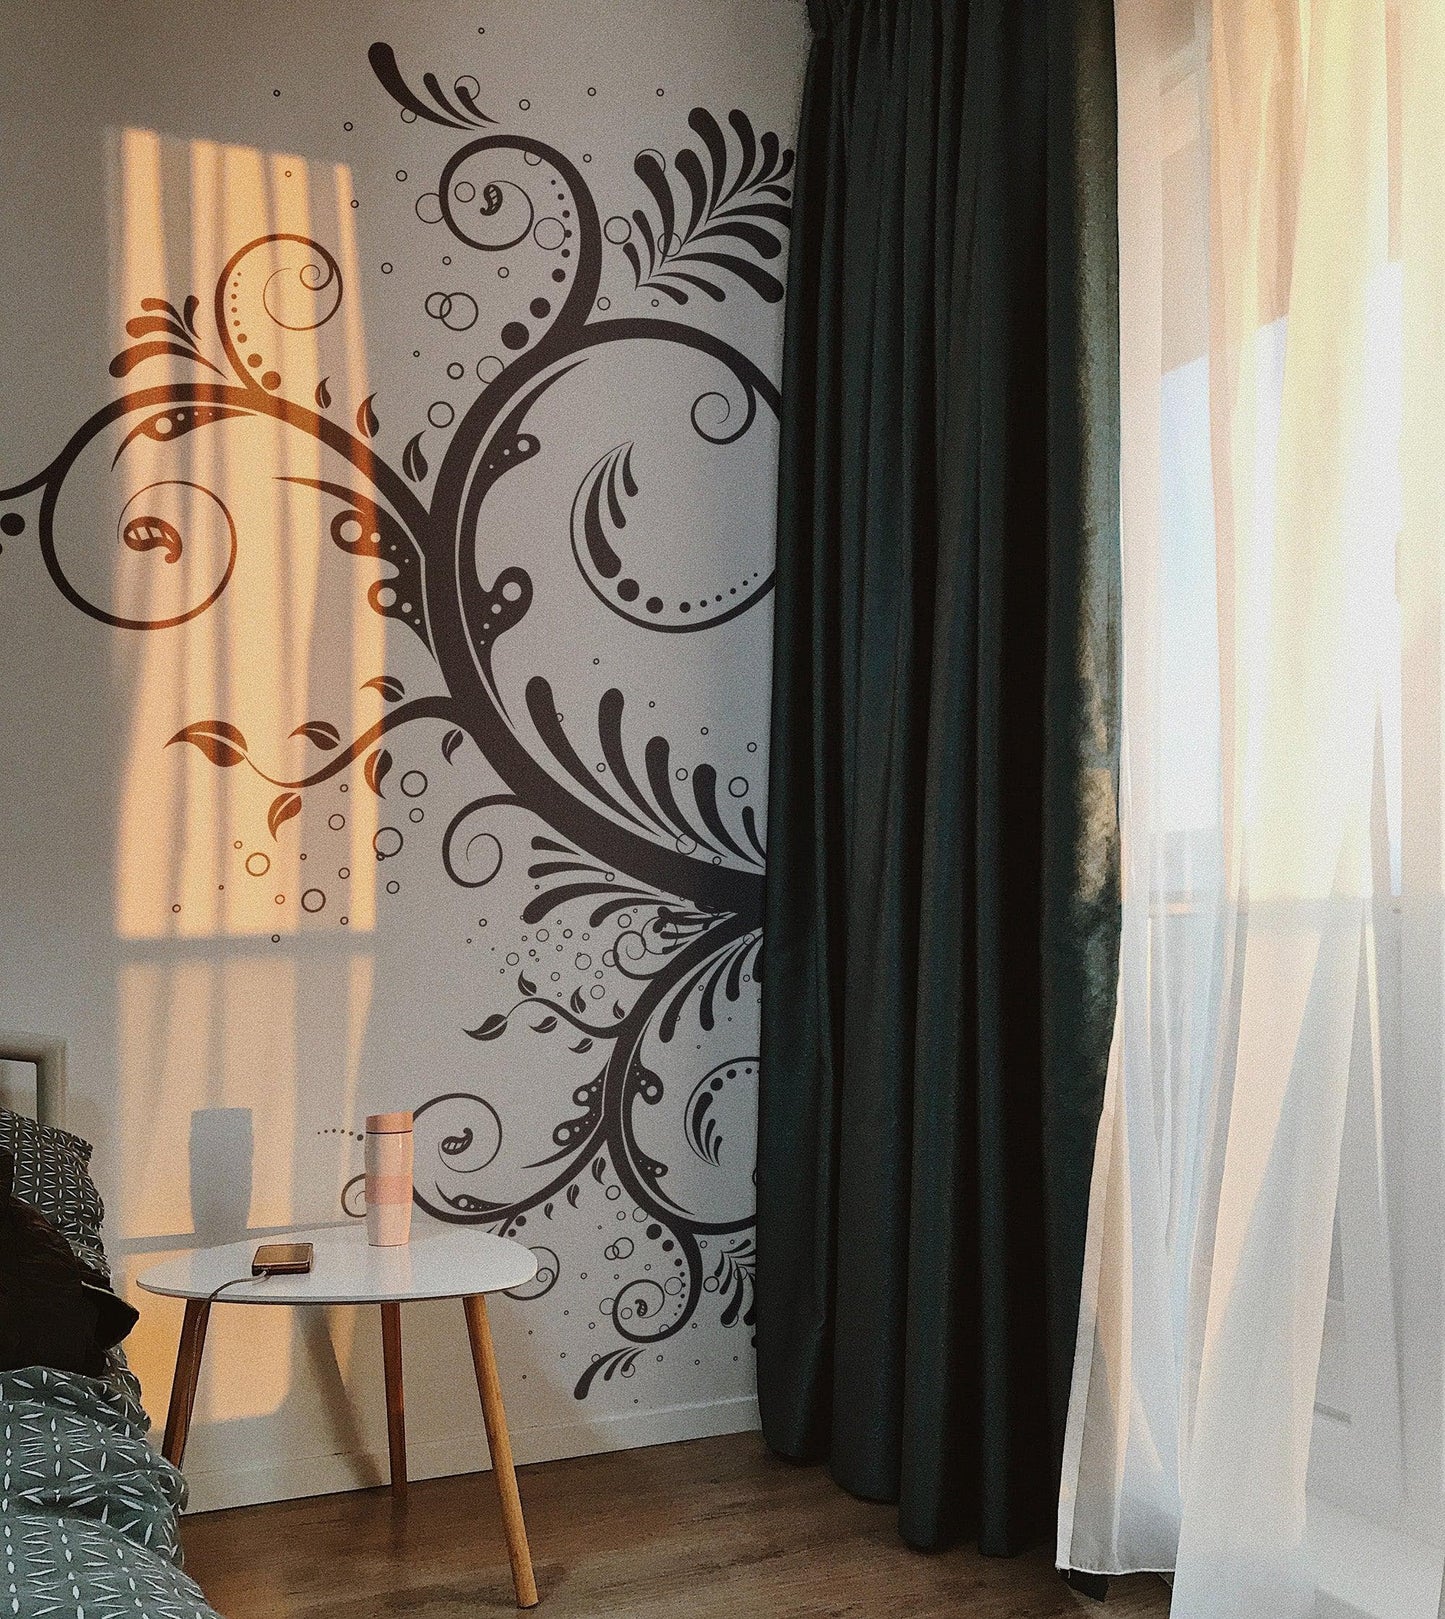 A black floral swirl decal on a white wall in a bedroom.